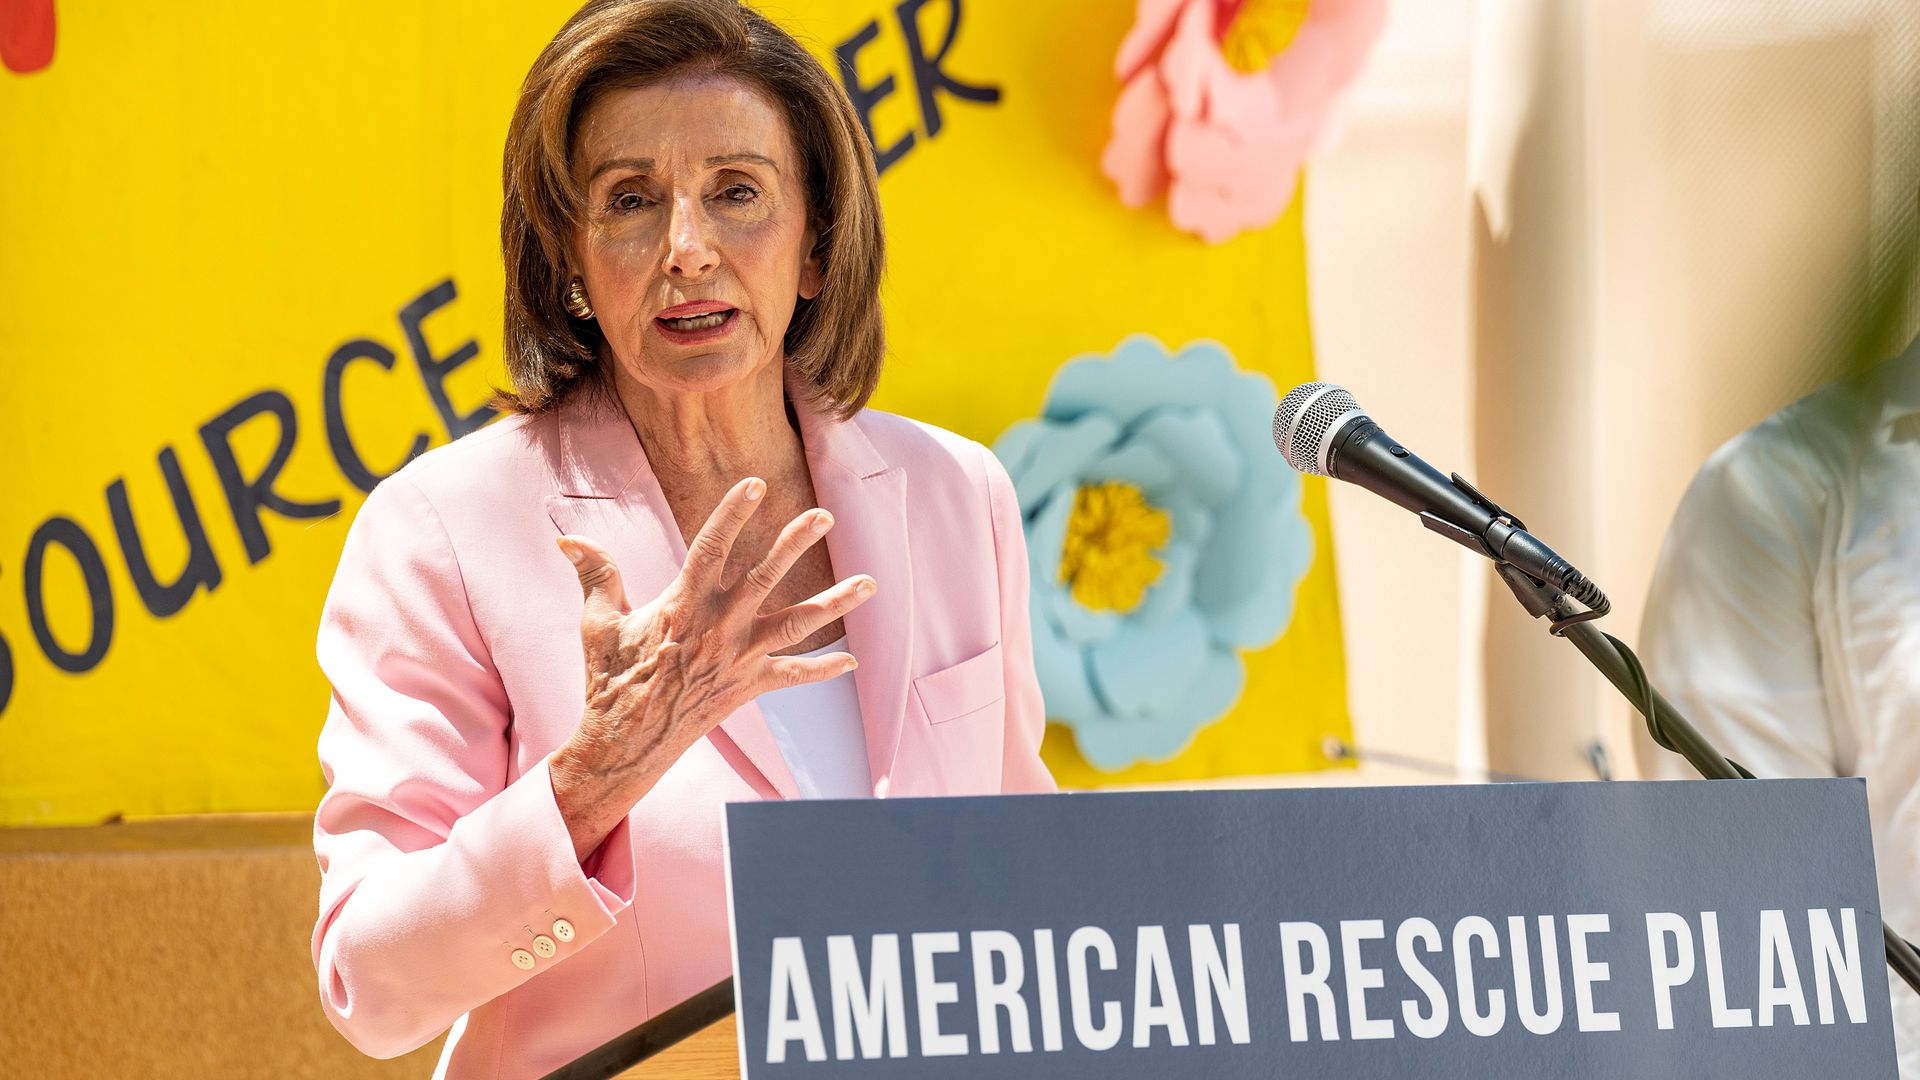 House Speaker Nancy Pelosi is seen speaking up the American Rescue Plan during an event in San Francisco.